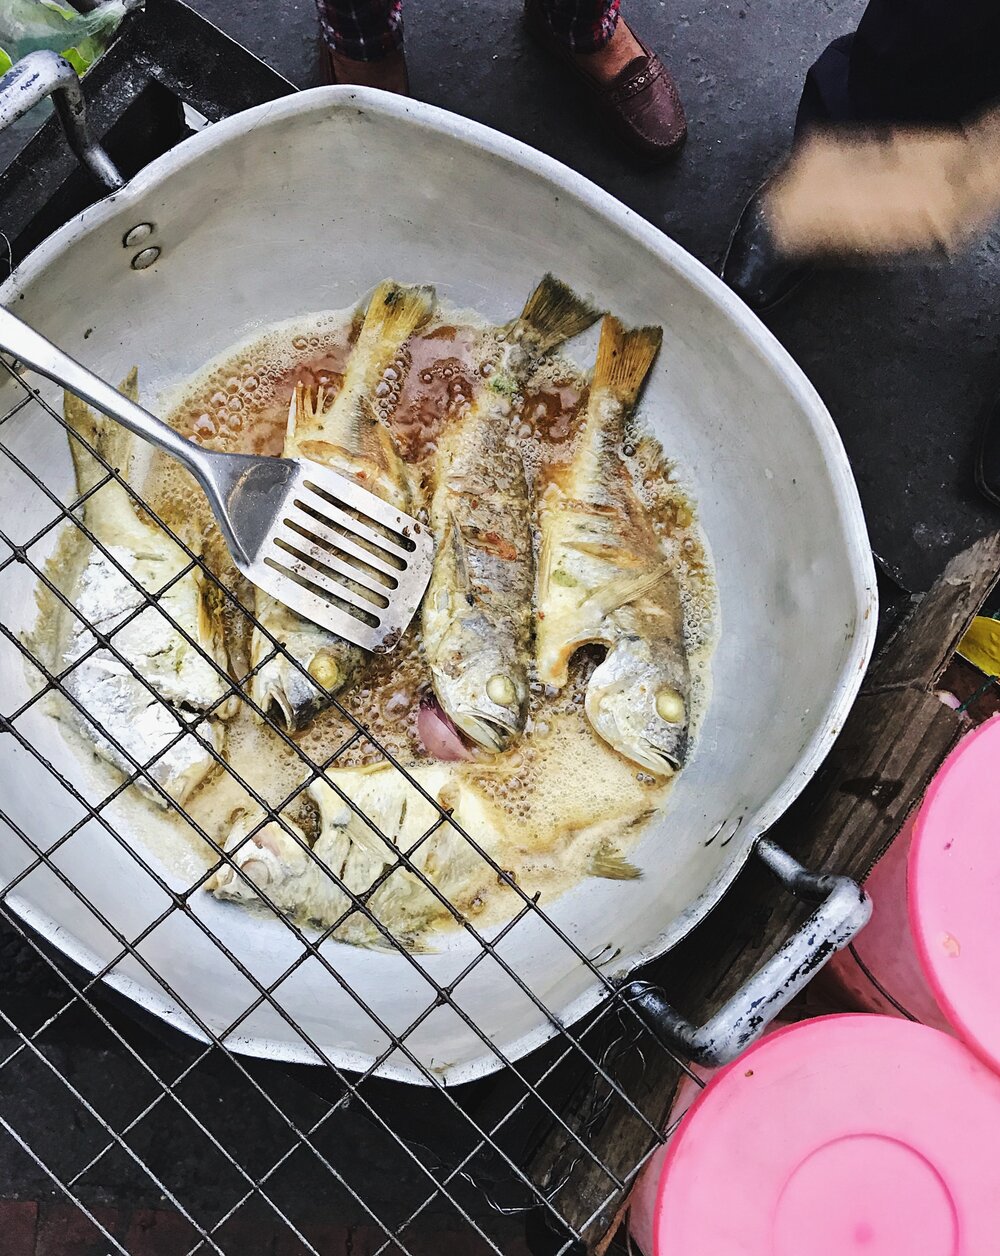  fish, freshly fried in the streets 